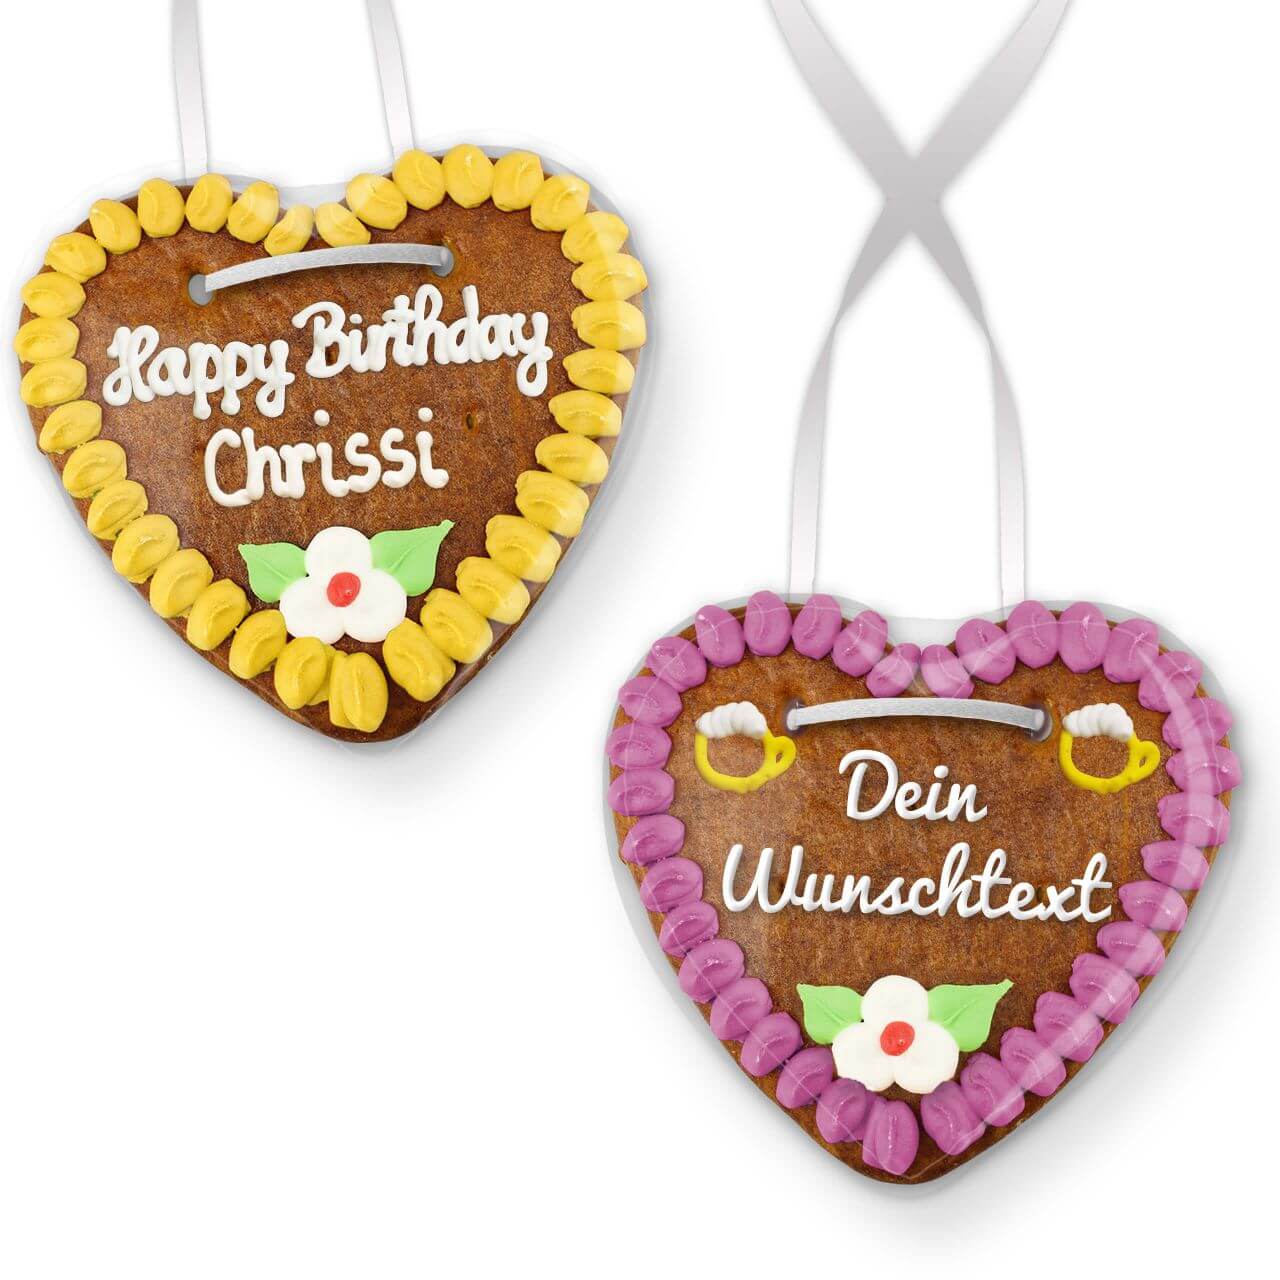 Customize gingerbread heart 14cm with text